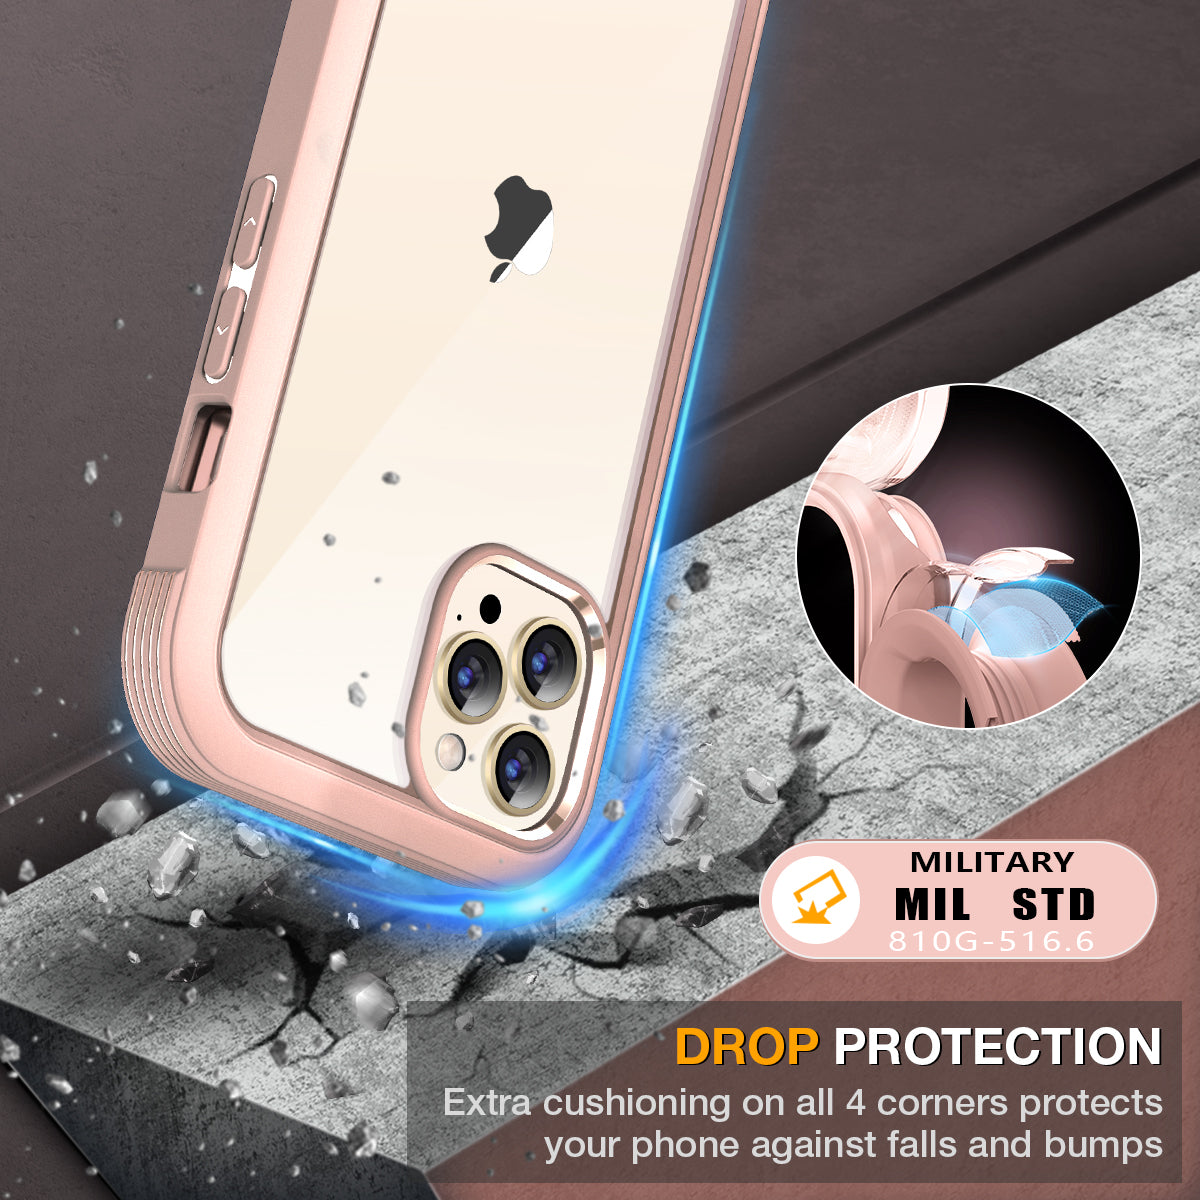 Miracase Glass iPhone 13 Pro Case 6.1 inch, 2022 New Full-Body Clear Bumper Case with Built-in 9H Tempered Glass Screen Protector for iPhone 13 Pro